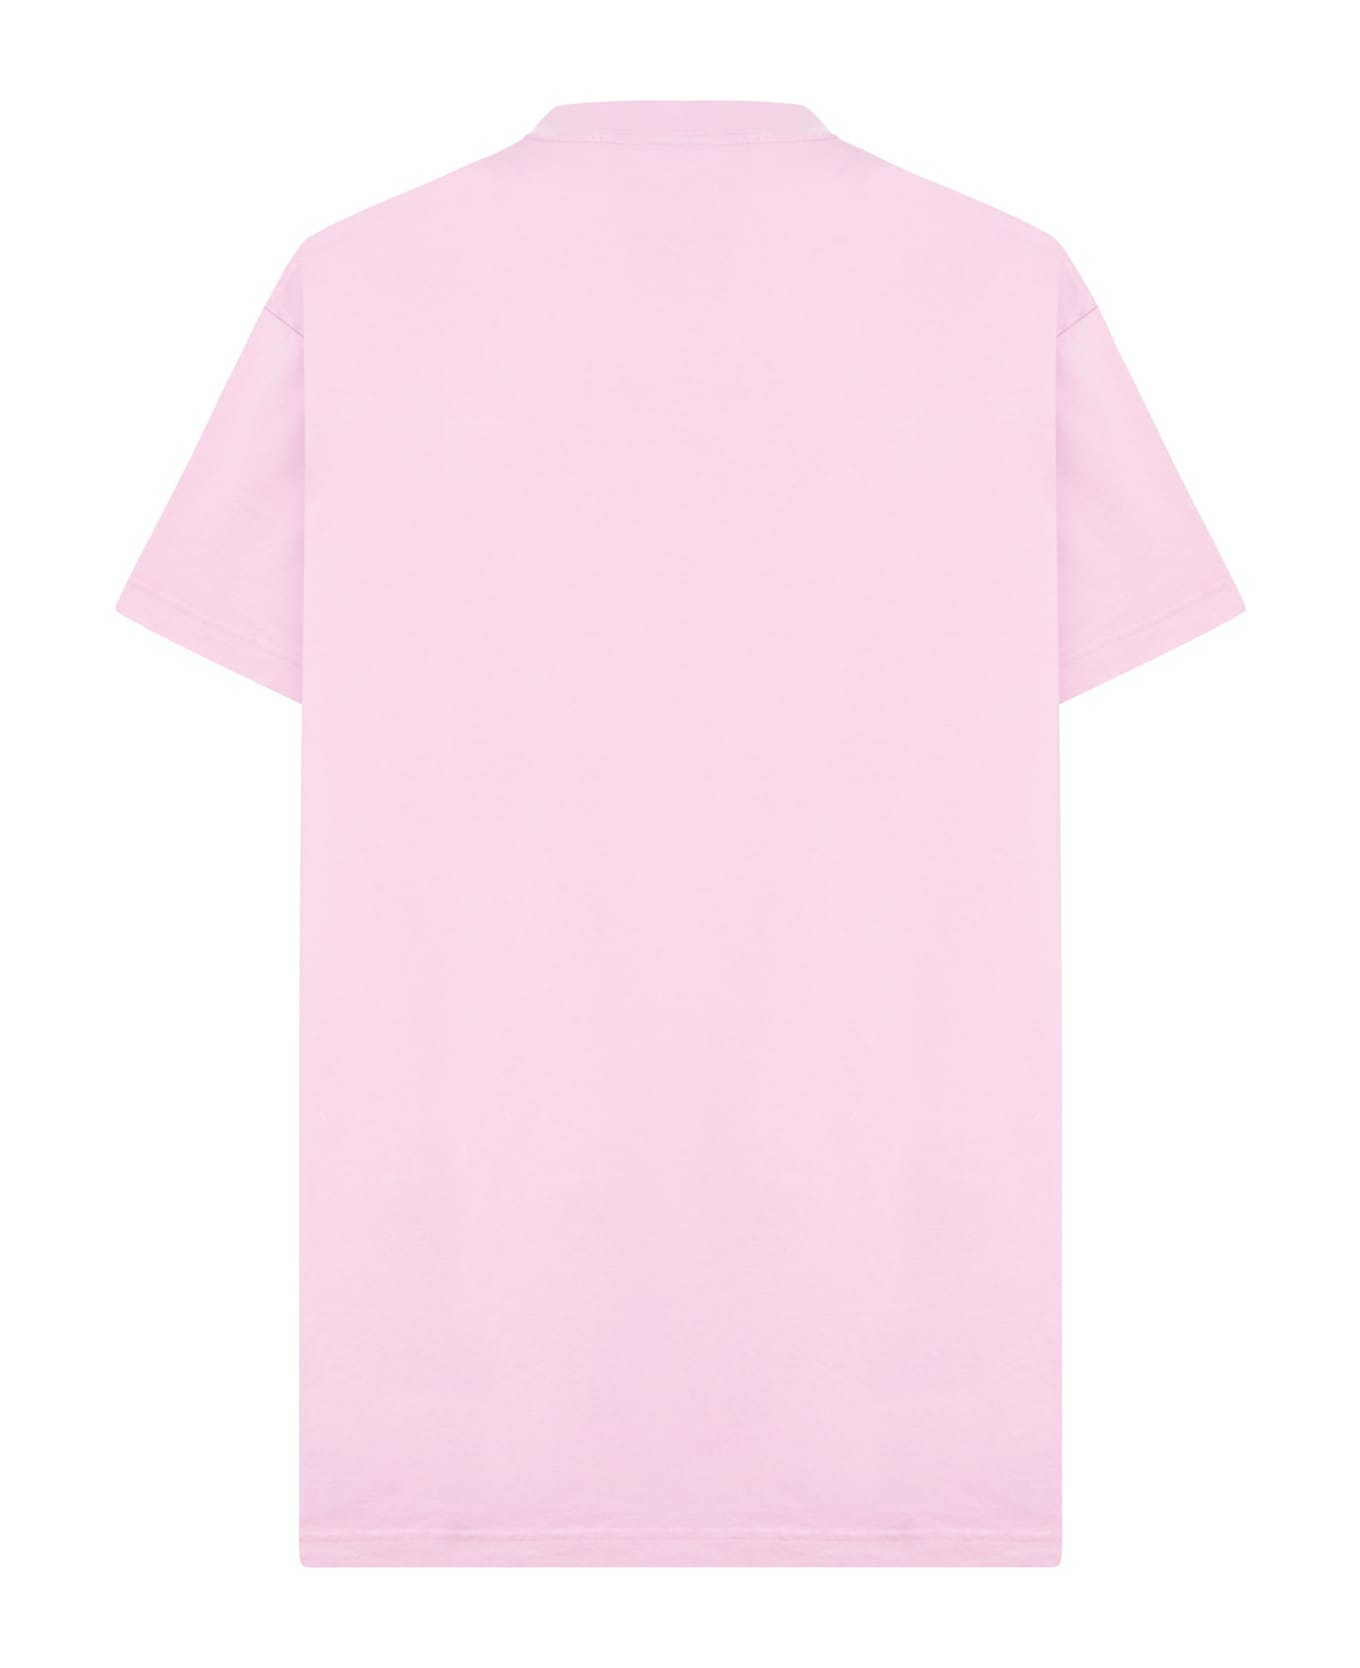 Balenciaga Oversized T-shirt Not Been Done Vintage Jersey - Faded Pink